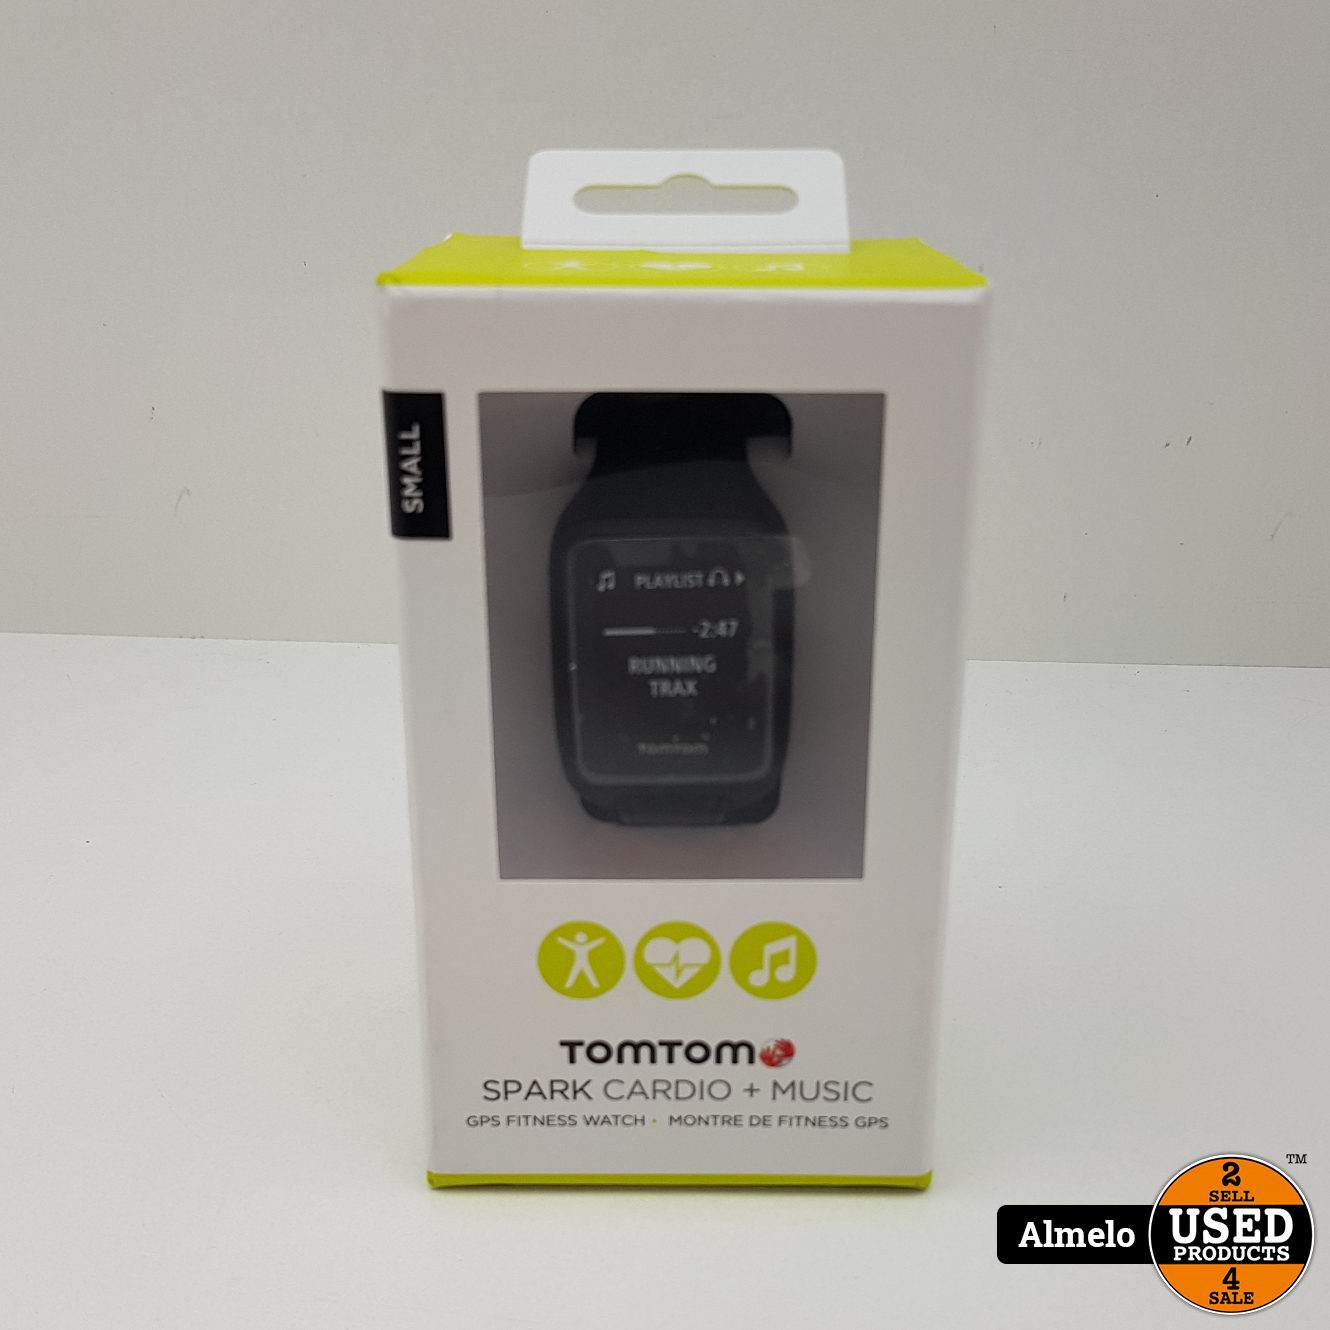 TomTom Spark Cardio + Music GPS Fitness watch - Used Products